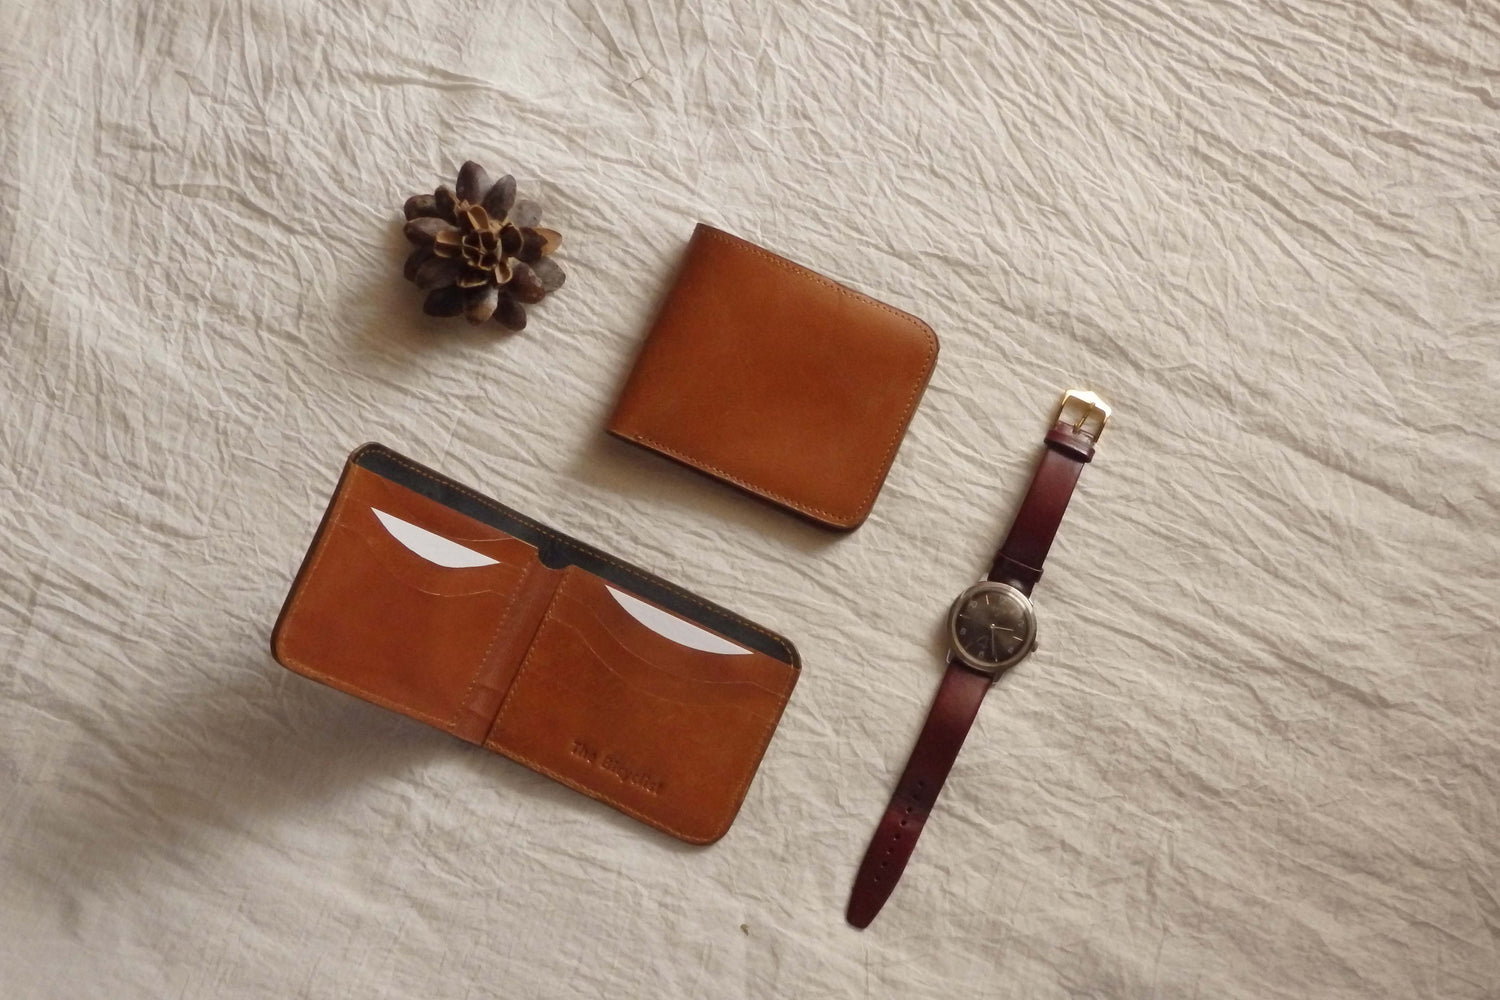 Handmade Veg Tanned Full Grain Bovine Leather Bifold Card Wallet in Tan with an analogue wrist watch and a pine cone